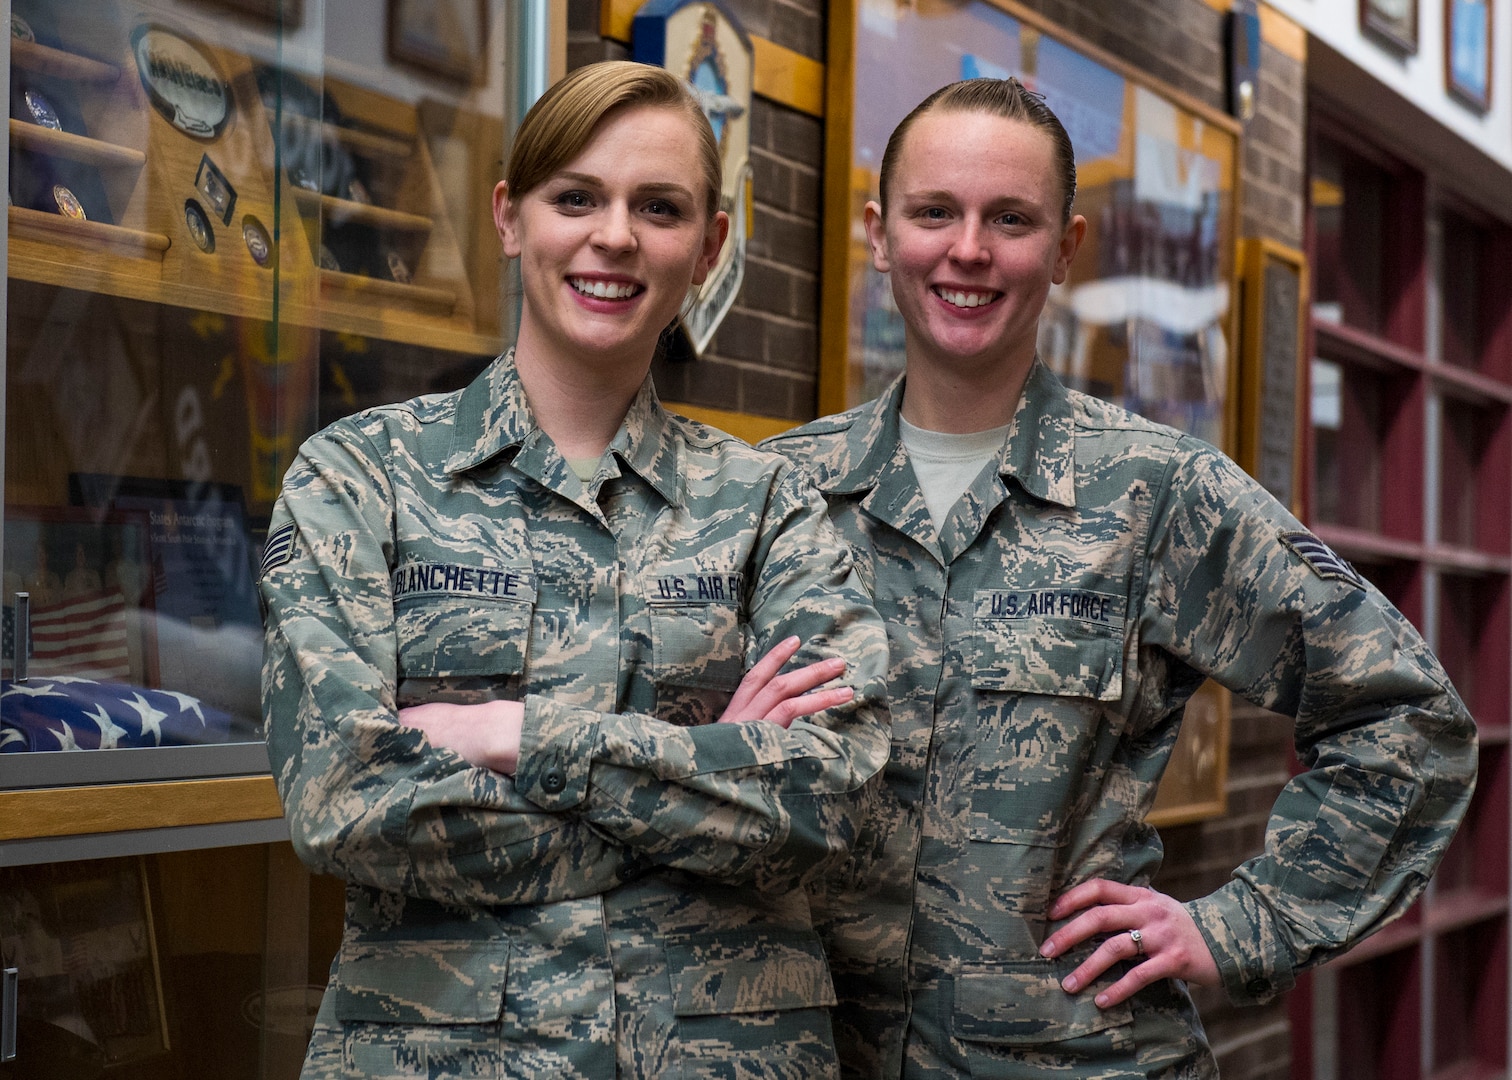 Staff Sgts. Erica Blanchette and Alyssa Nelson pose for a photo Dec. 20, 2018, at Bangor National Guard Base, Maine. The sisters, who are also identical twins, swore in eight months apart.